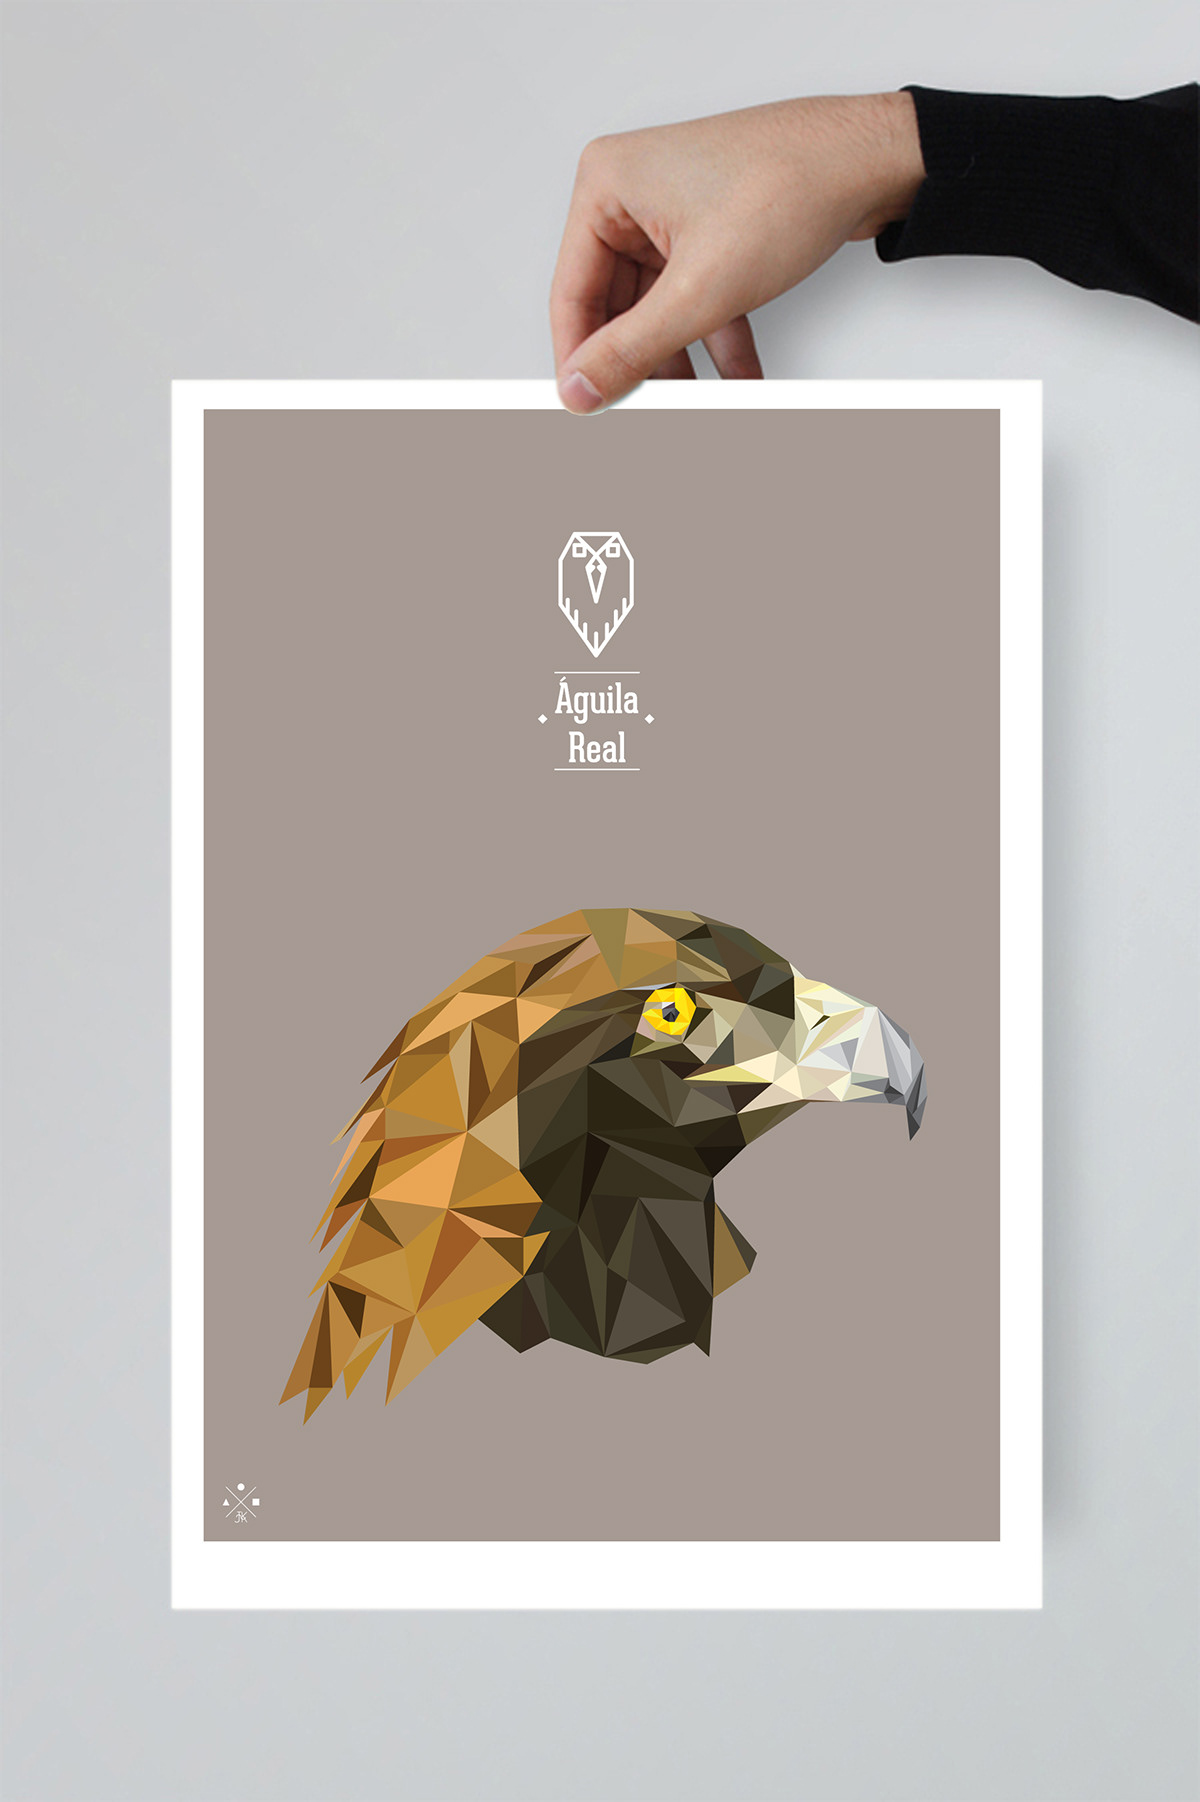 pets wolf FOX deer eagle owl Triangles tessalation polygon LOW poly animals